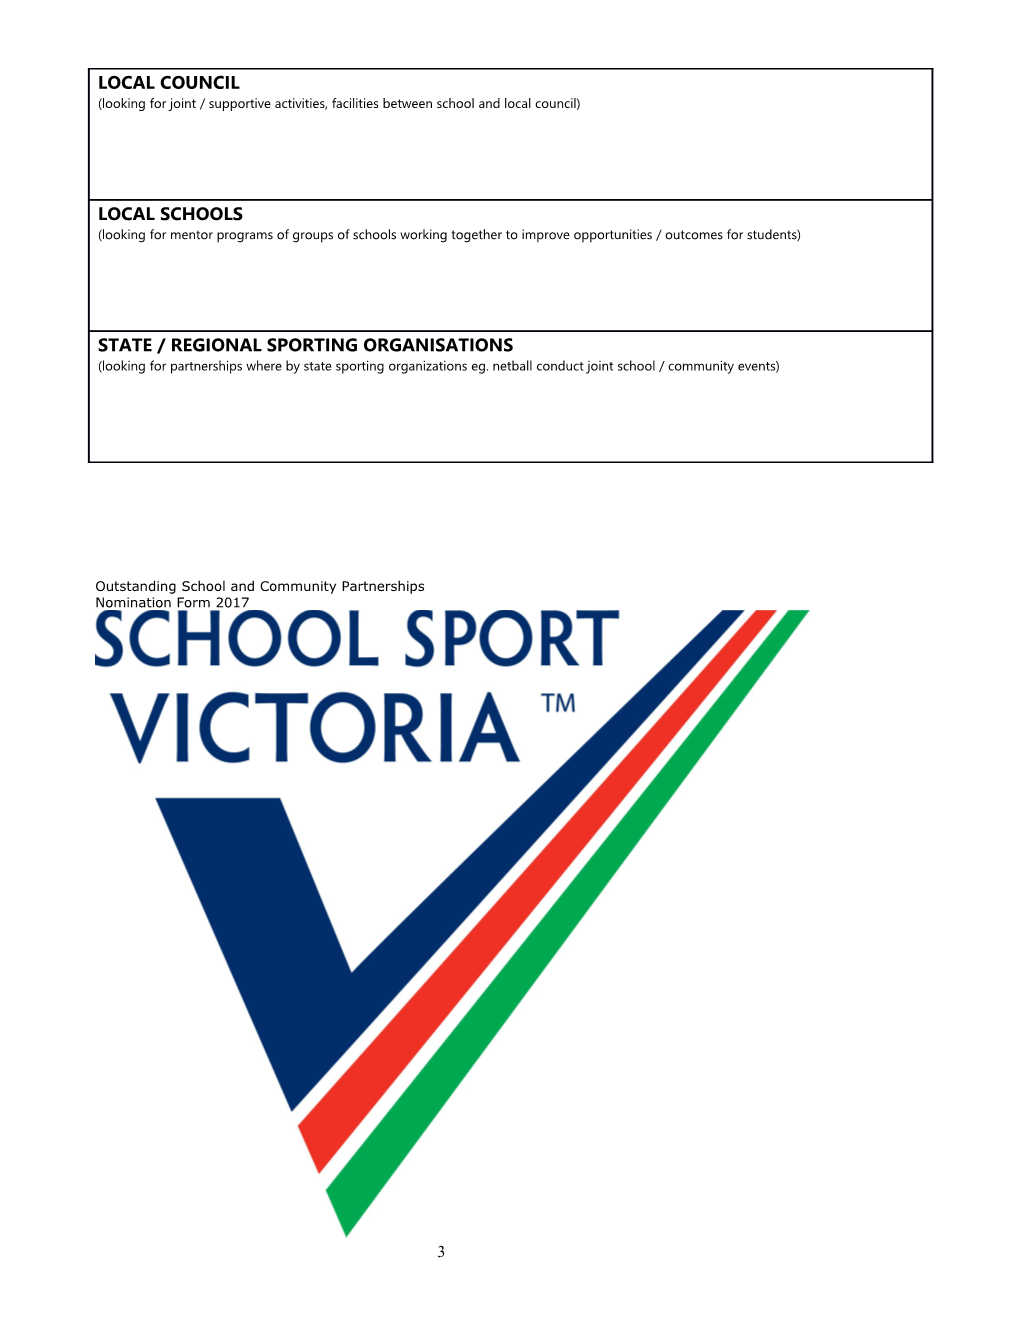 Victorian School Sports Awards 2015 Outstanding School and Community Partnership (Word)